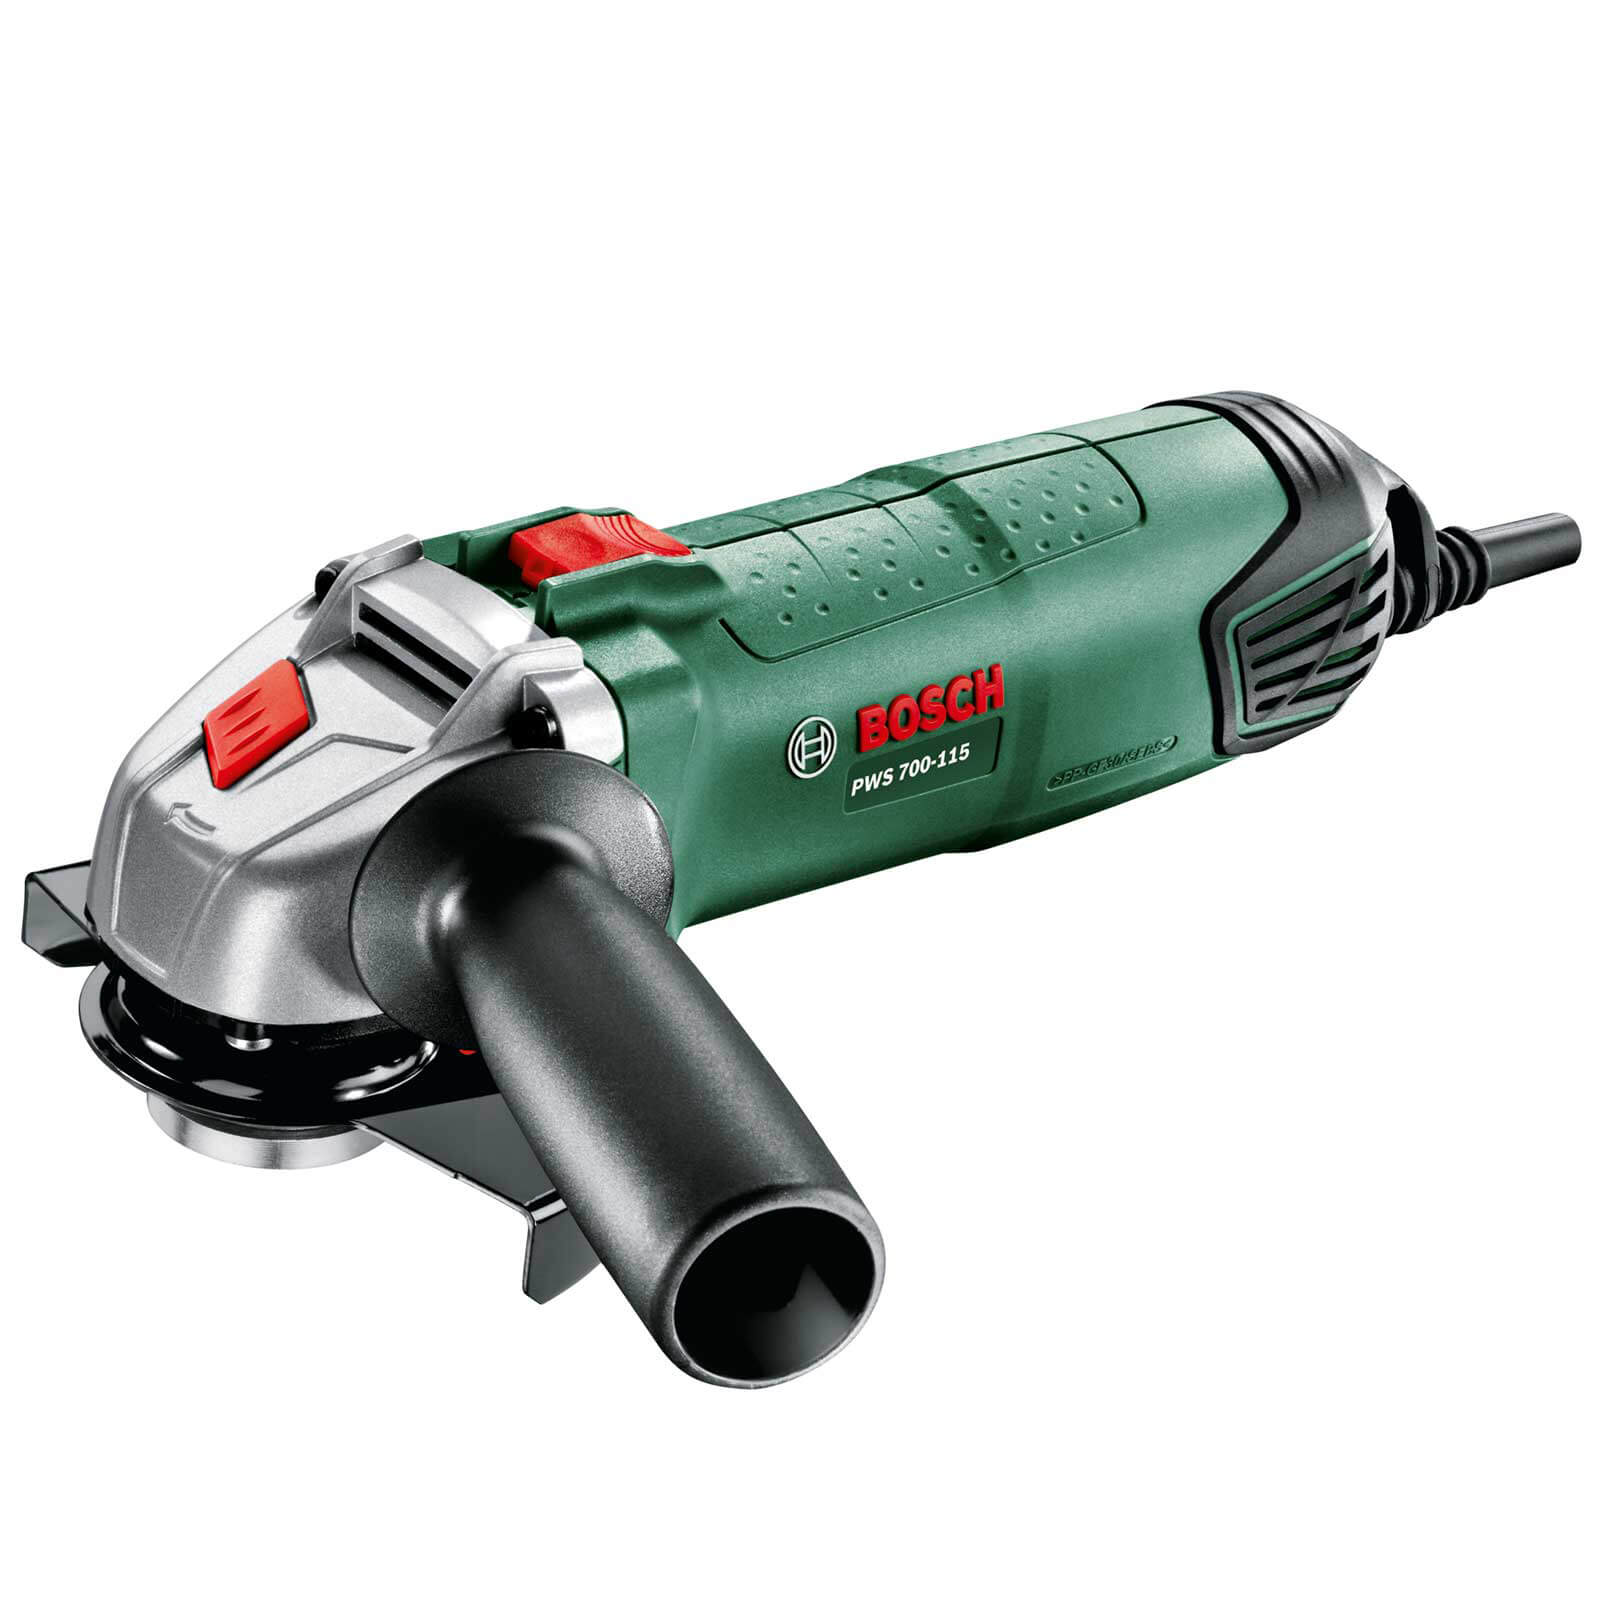 Photo of Bosch Pws 700-115 Angle Grinder 115mm